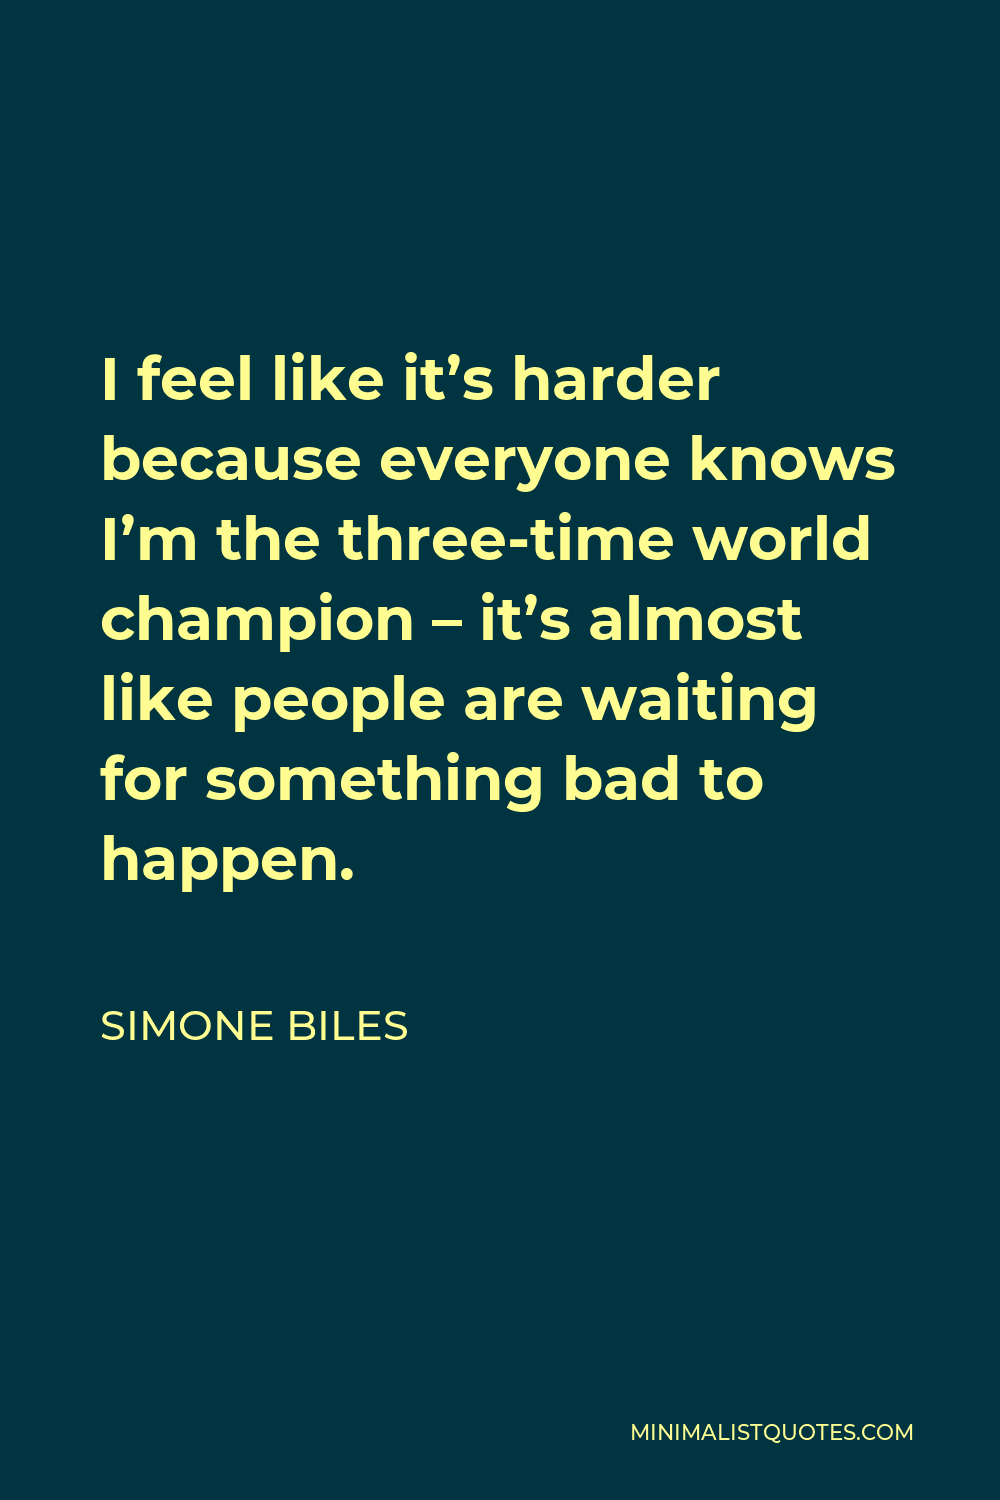 Simone Biles Quote - I feel like it’s harder because everyone knows I’m the three-time world champion – it’s almost like people are waiting for something bad to happen.